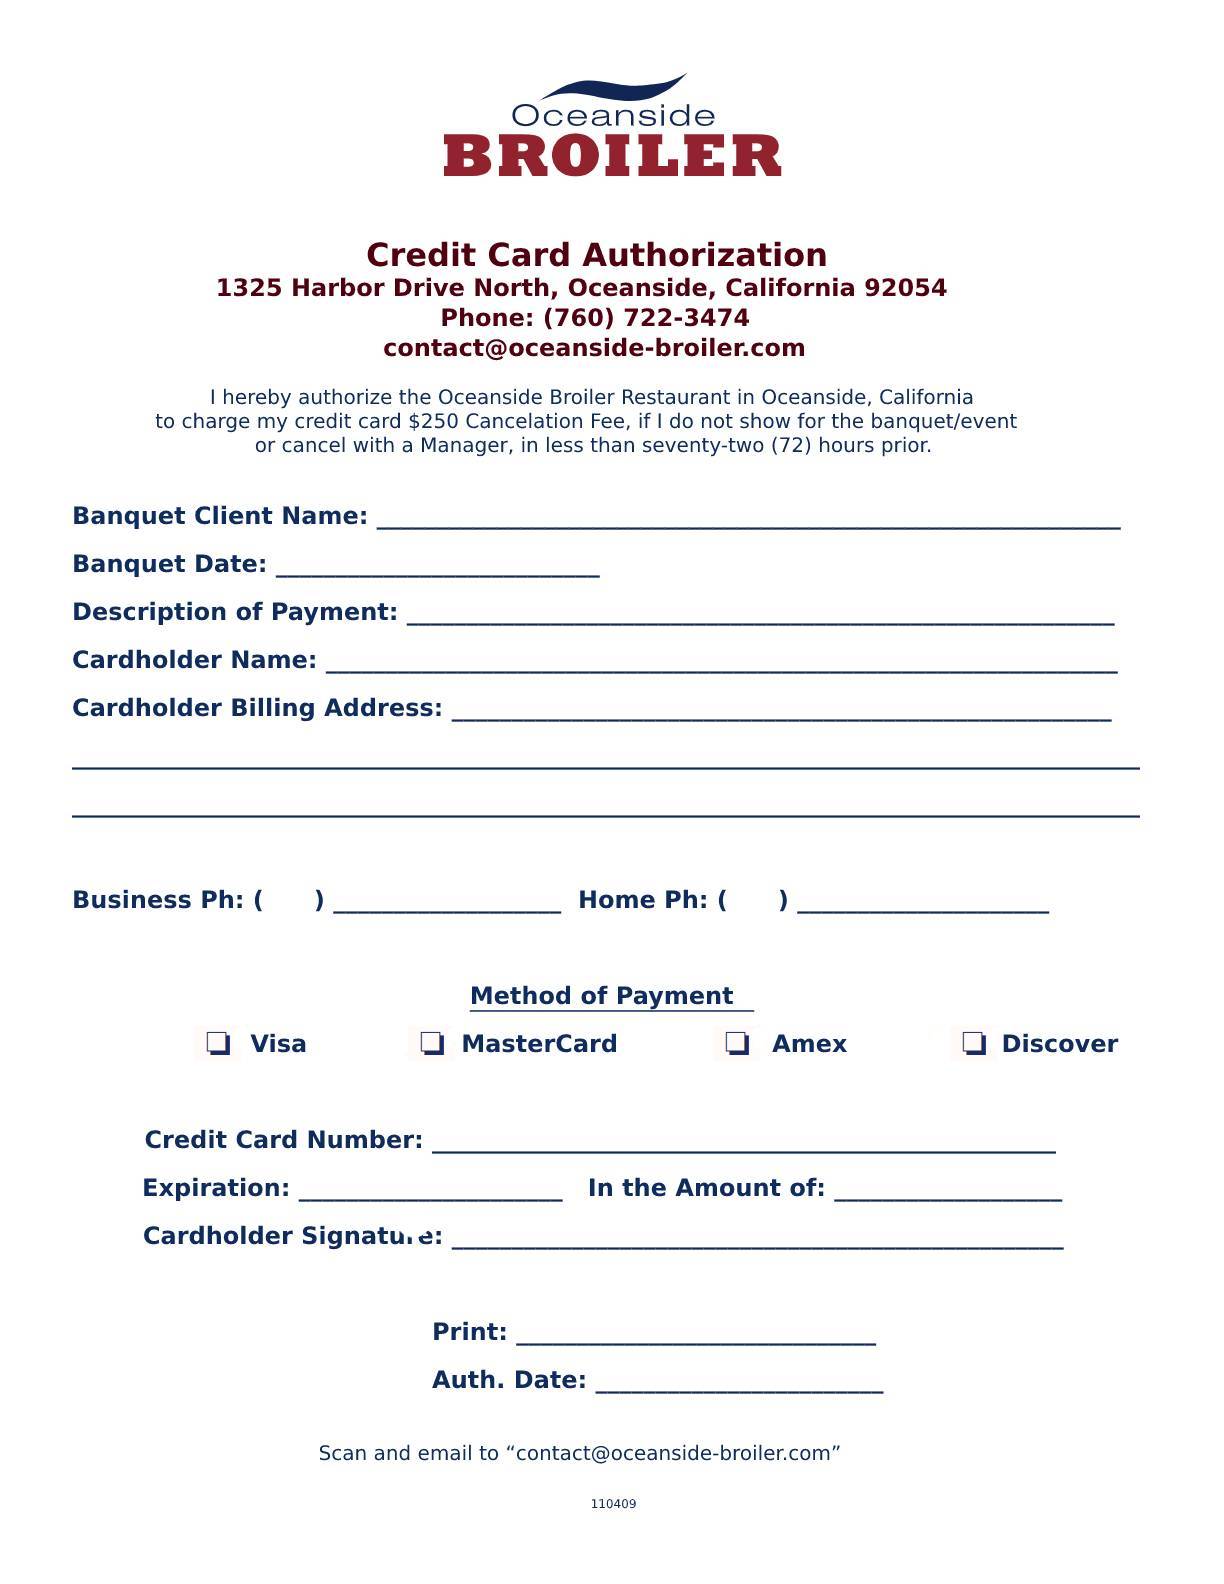 Banquet Credit Card Authorization - Oceanside Broiler